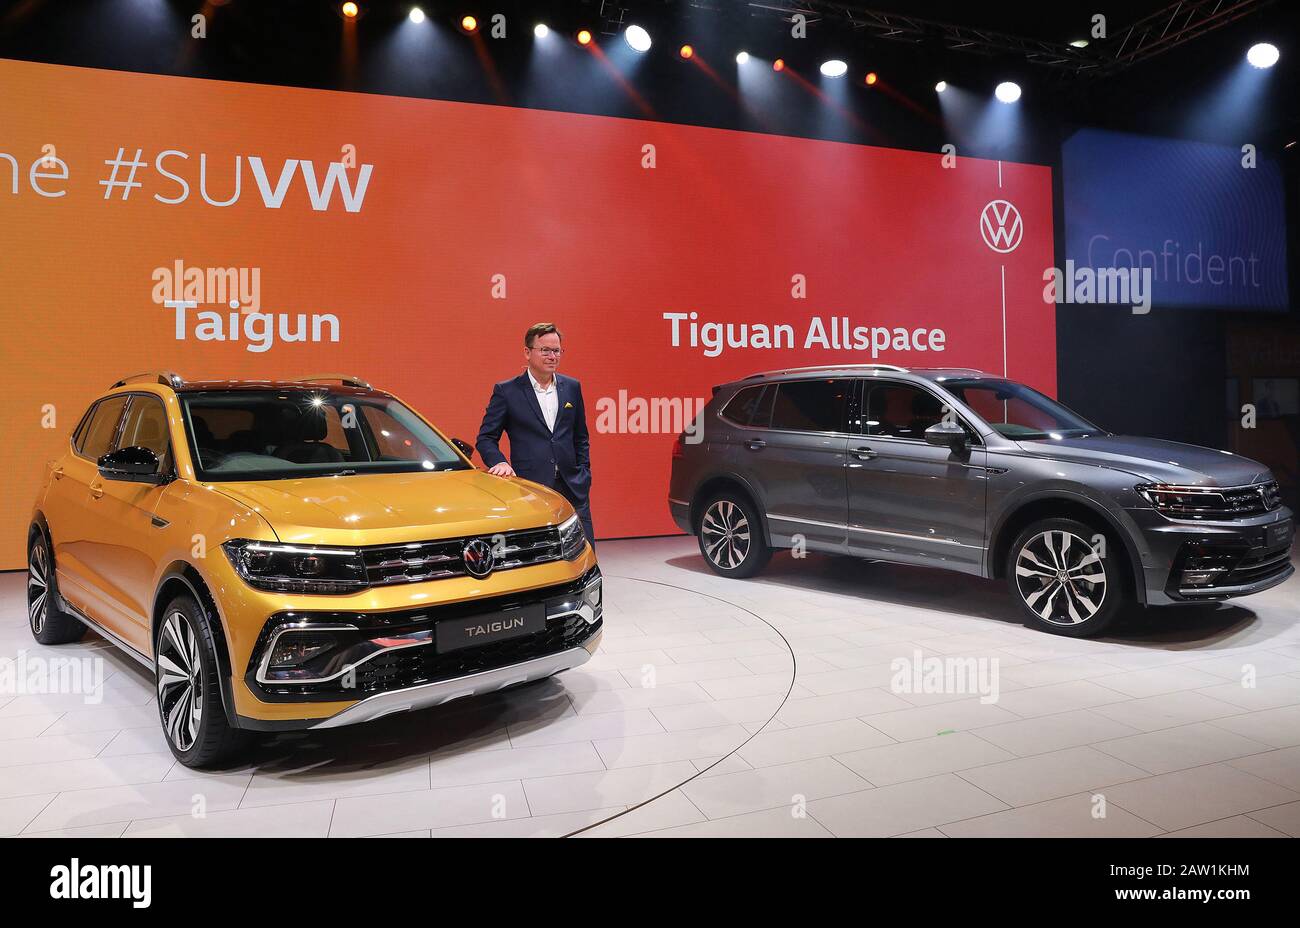 New Delhi, Auto Expo 2020. 7th Feb, 2020. Photo taken on Feb. 5, 2020 shows the Volkswagen Taigun car (L) and Tiguan car (R), which will be exhibited during the upcoming Auto Expo 2020, in the Greater Noida area of the northern state of Uttar Pradesh in India. The Auto Expo 2020 will officially kick off here on Feb. 7, 2020. Credit: Str/Xinhua/Alamy Live News Stock Photo